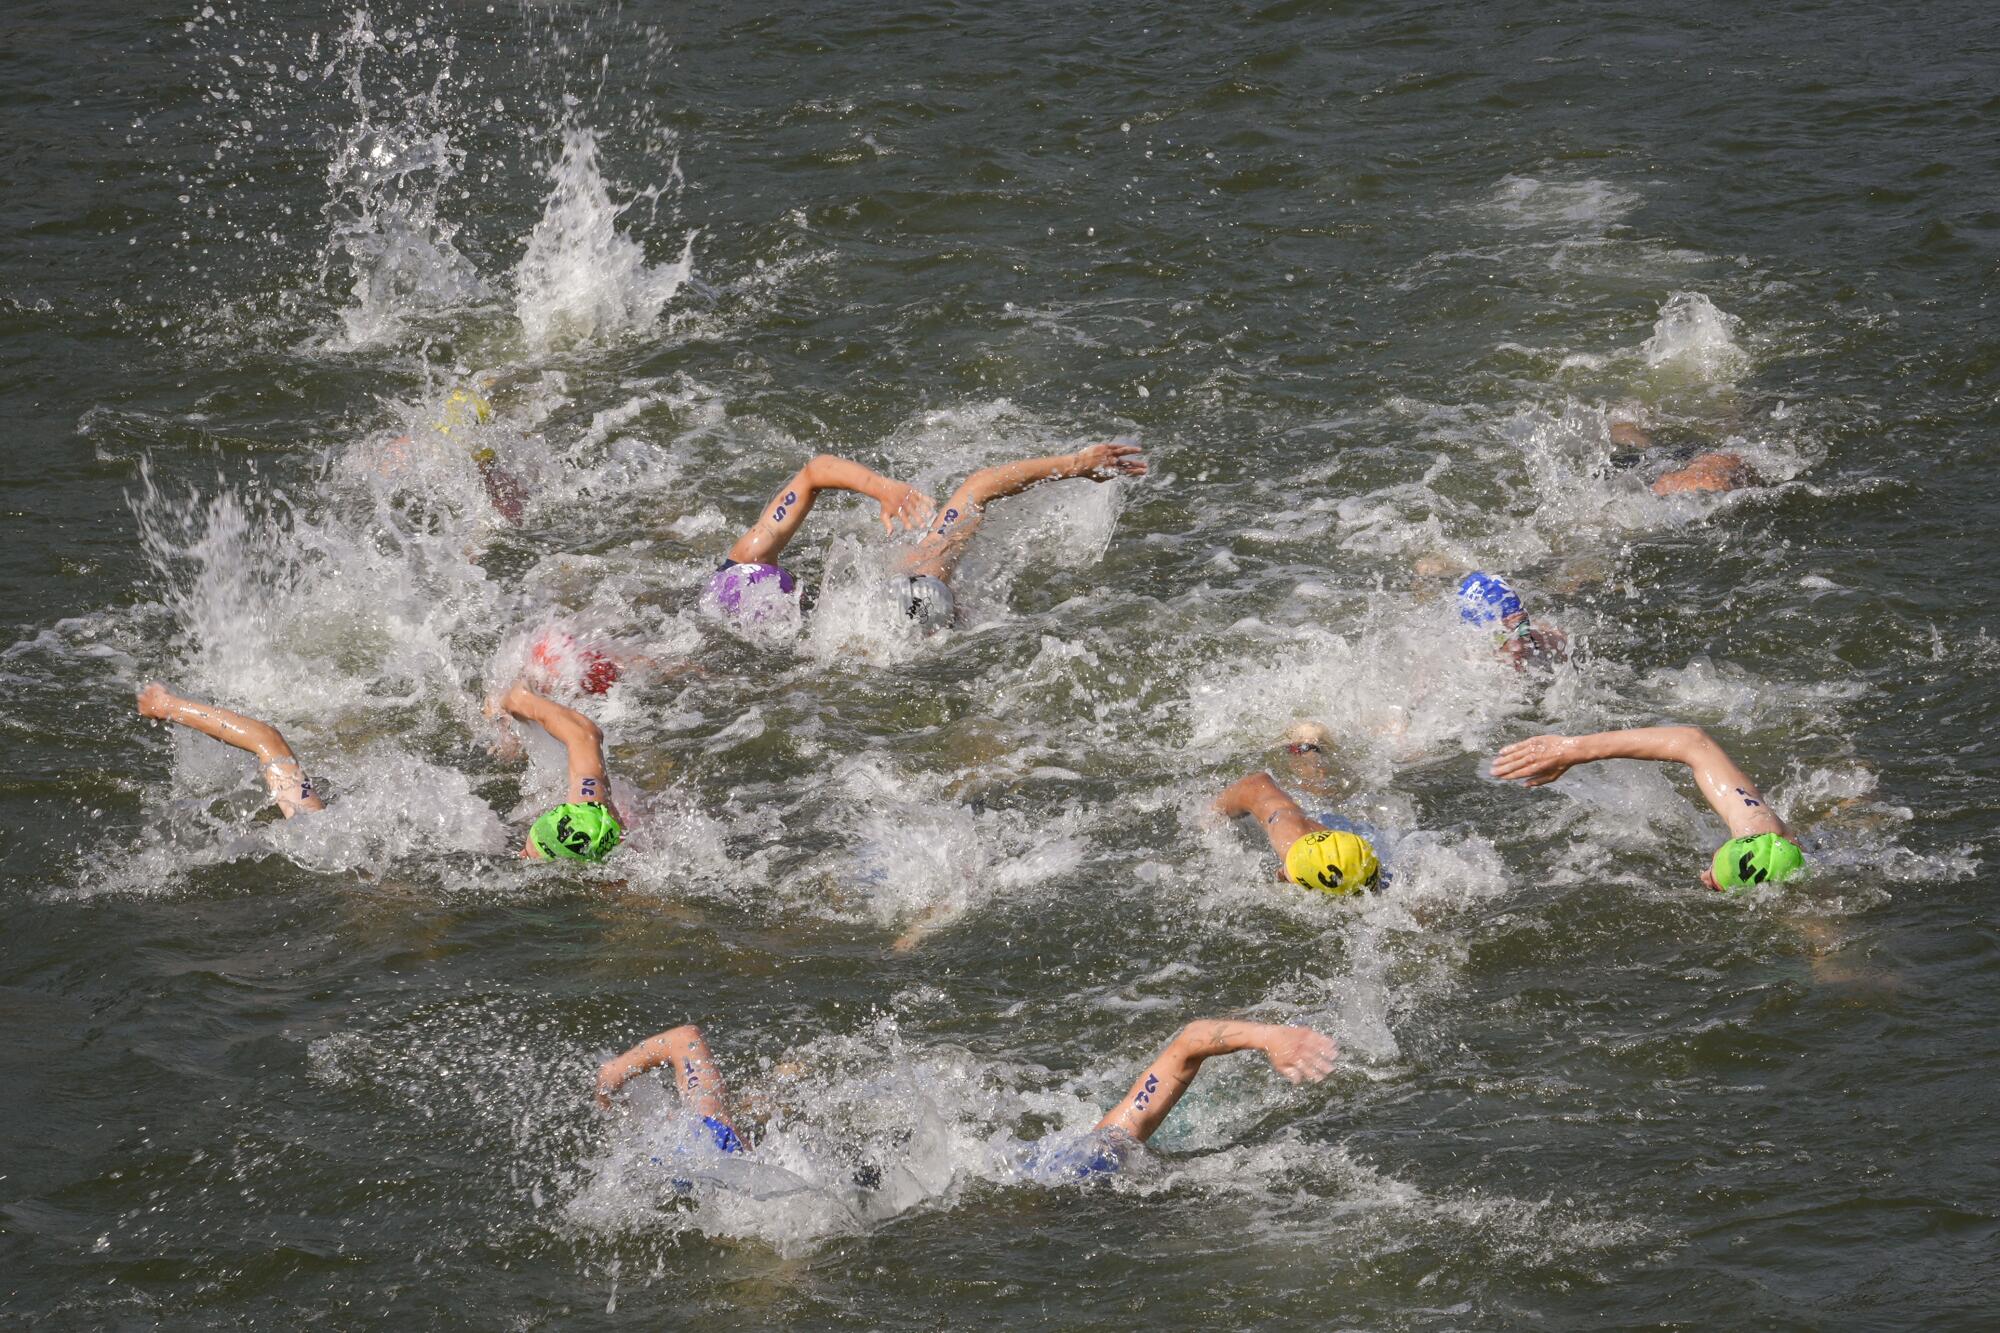 Athletes swim in the Seine River during the men's individual triathlon on Wednesday.